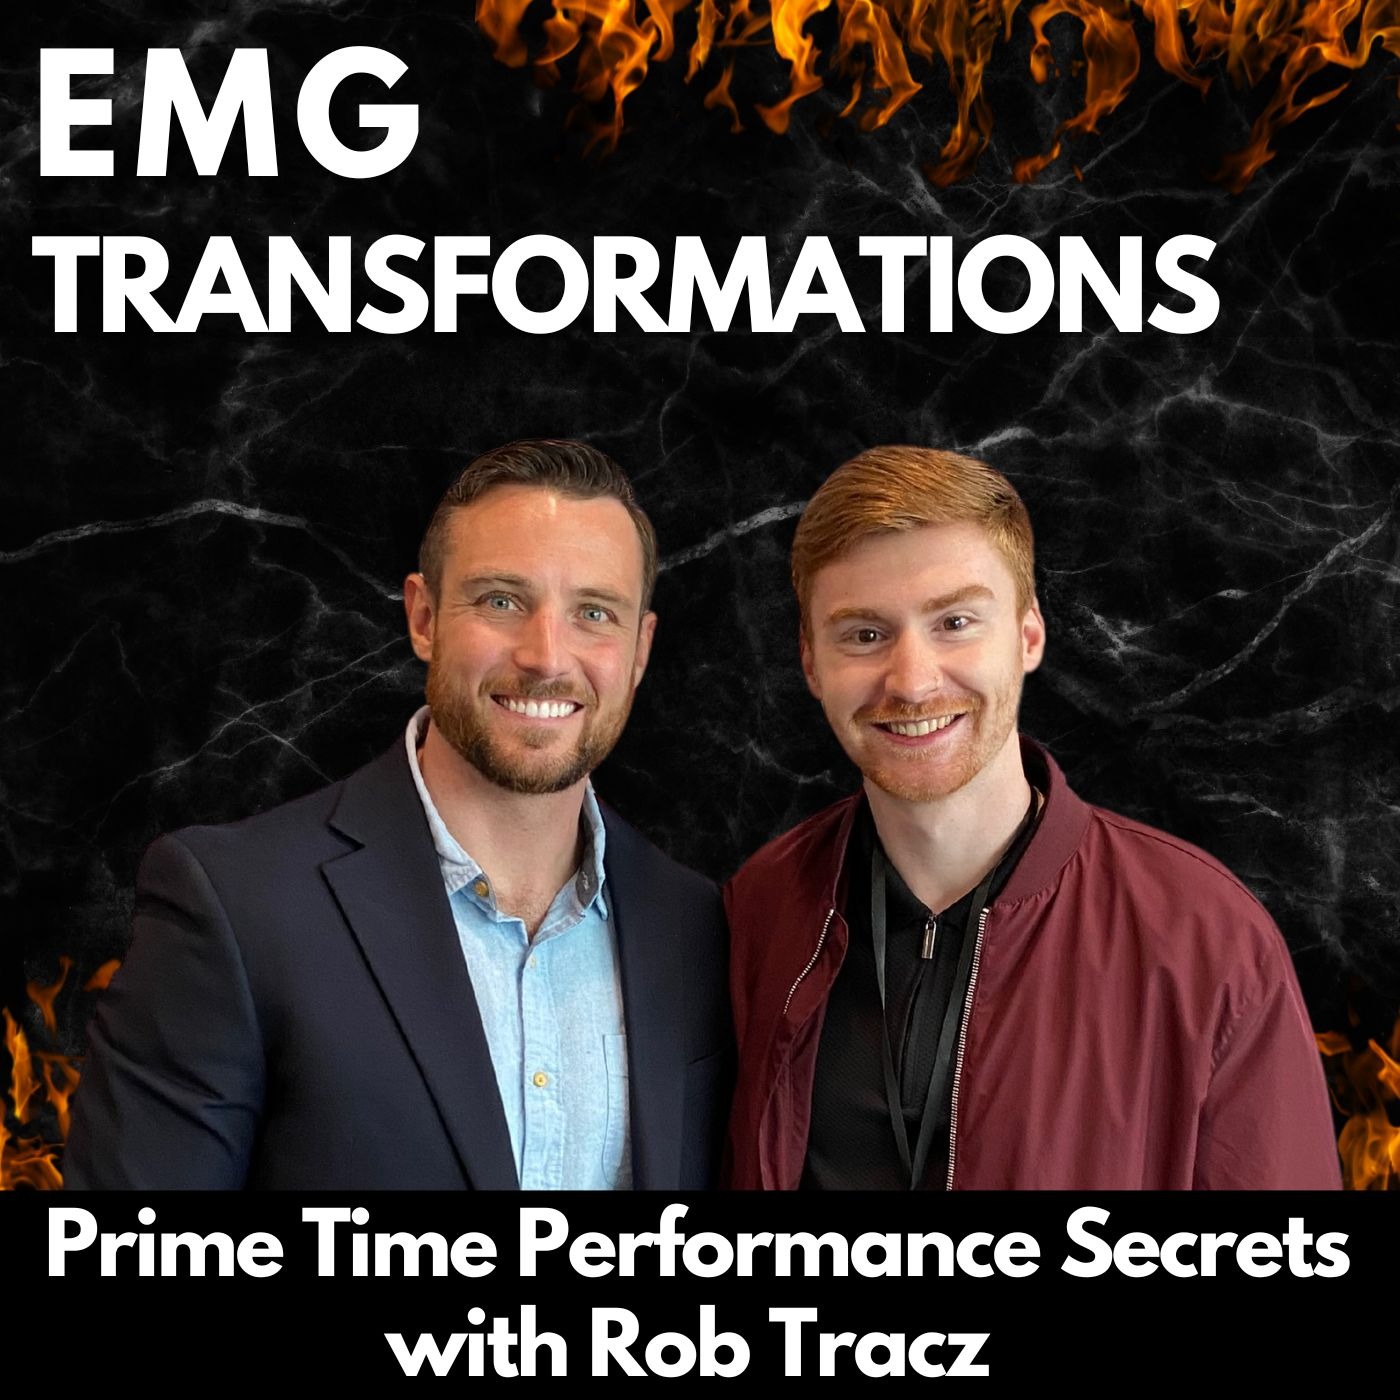 Prime Time Performance Secrets with Rob Tracz